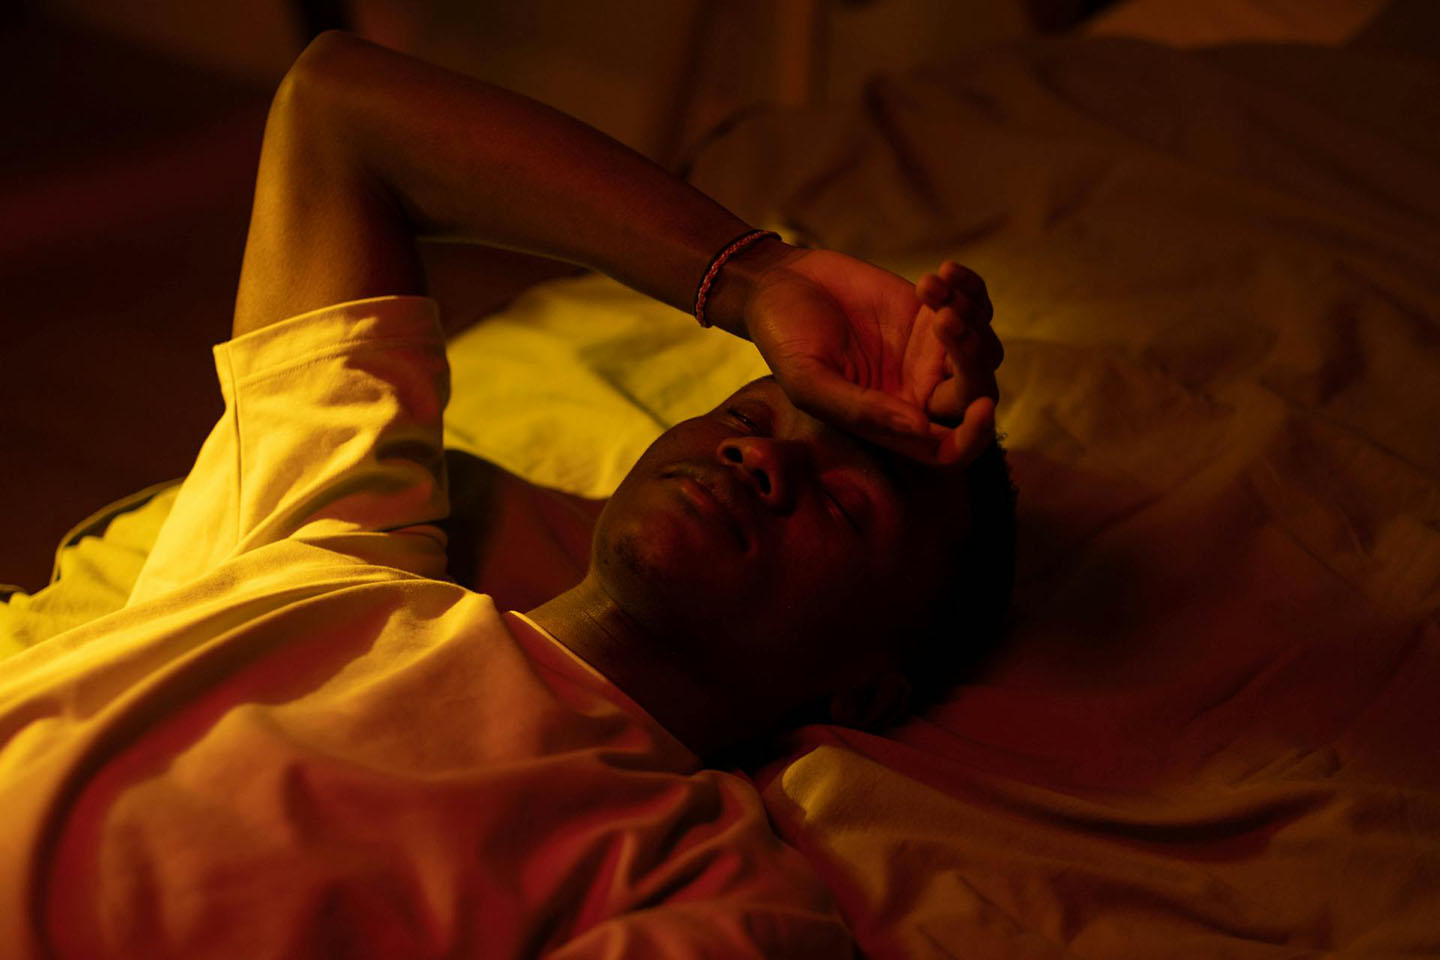 a man lying on a bed at night with his right hand placed on his forehead